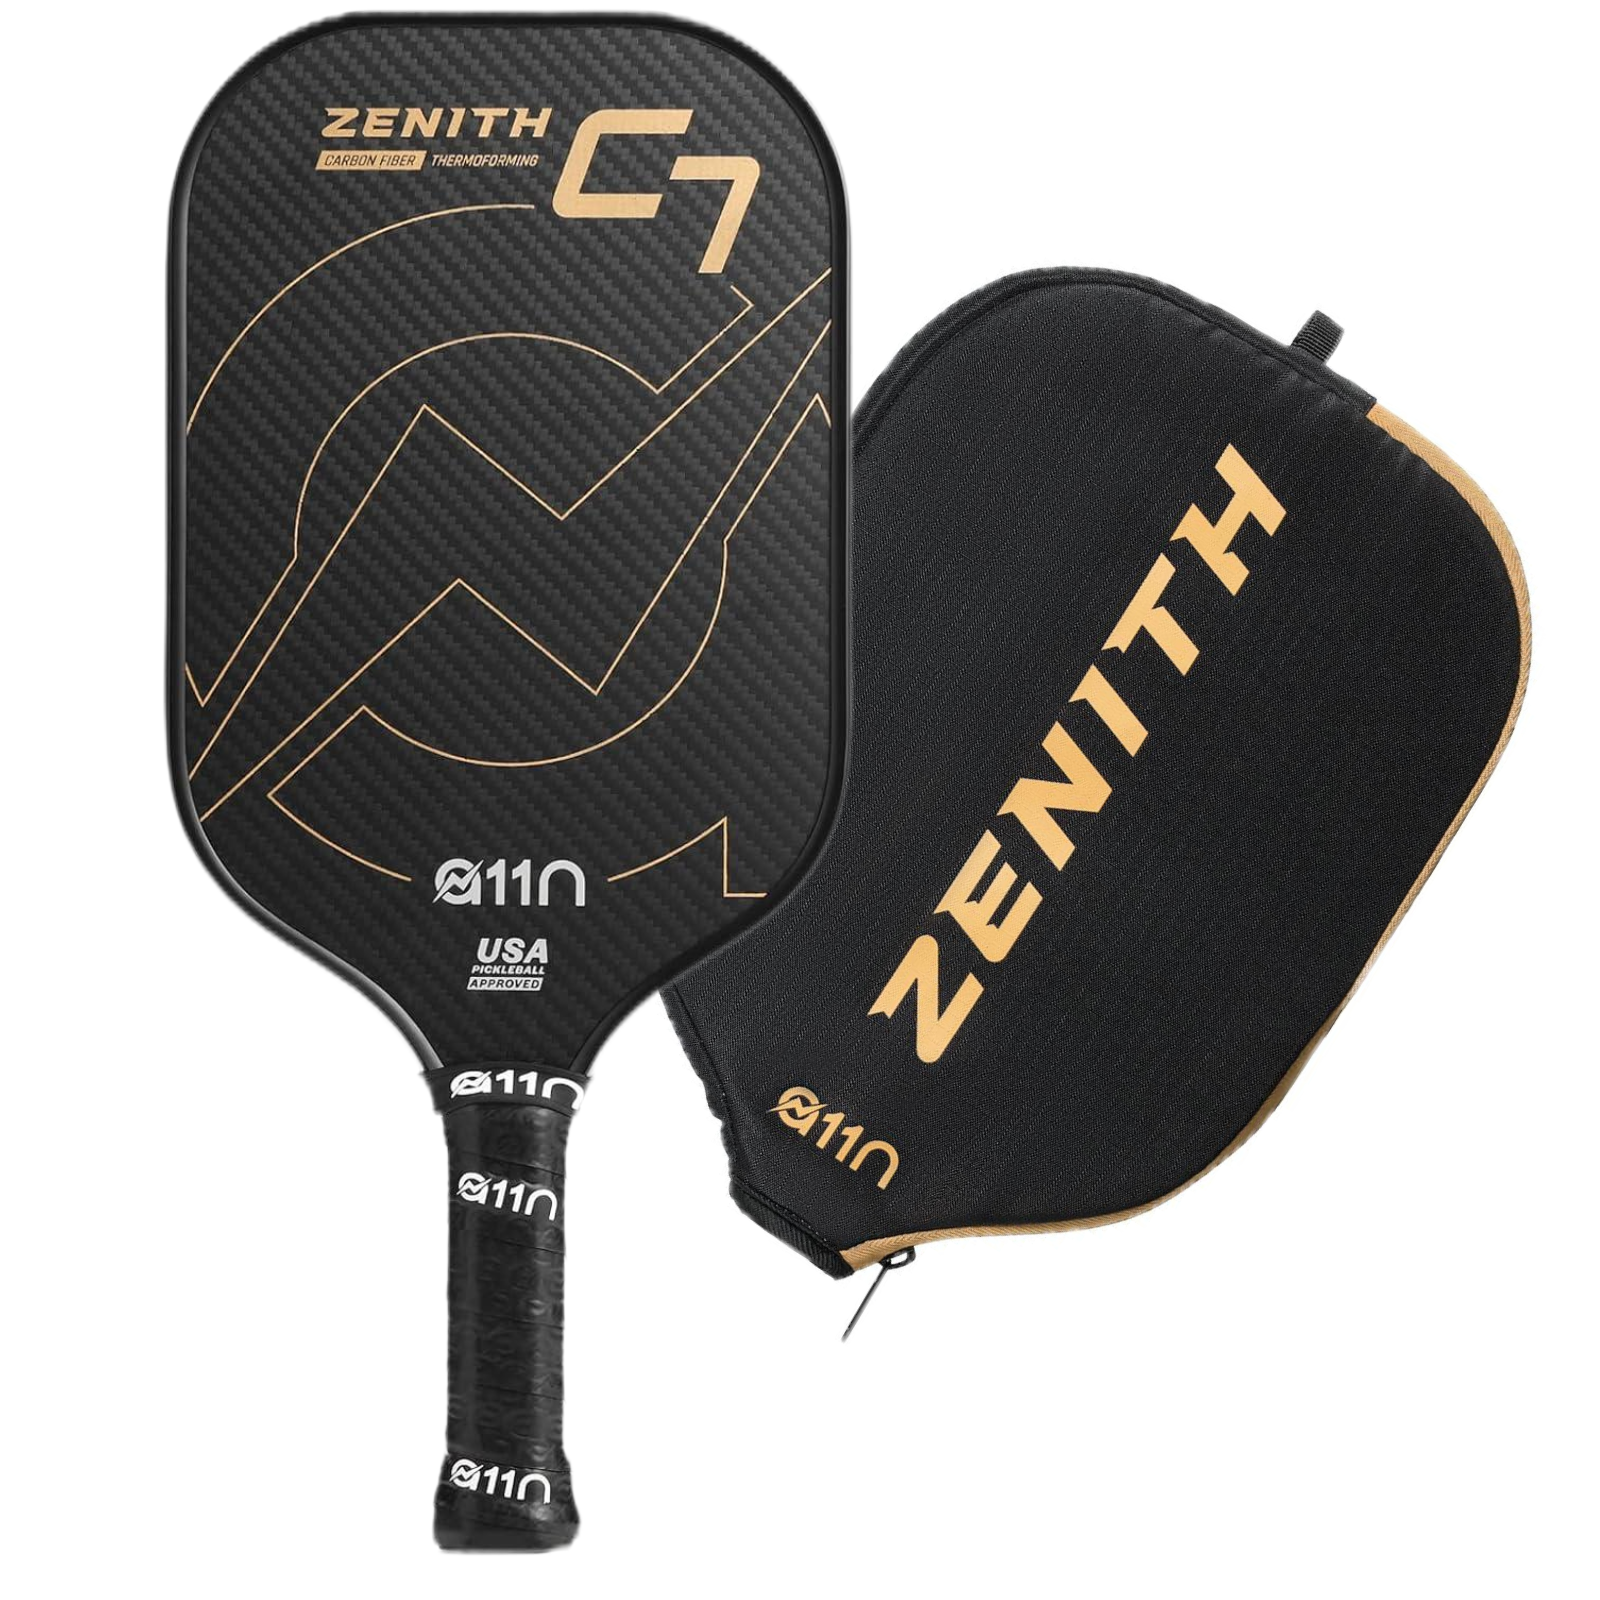 A11N SPORTS Sporting Goods > Outdoor Recreation > Outdoor Games > Pickleball > Pickleball Paddles A11N Zenith Pro Spin Pickleball Paddle